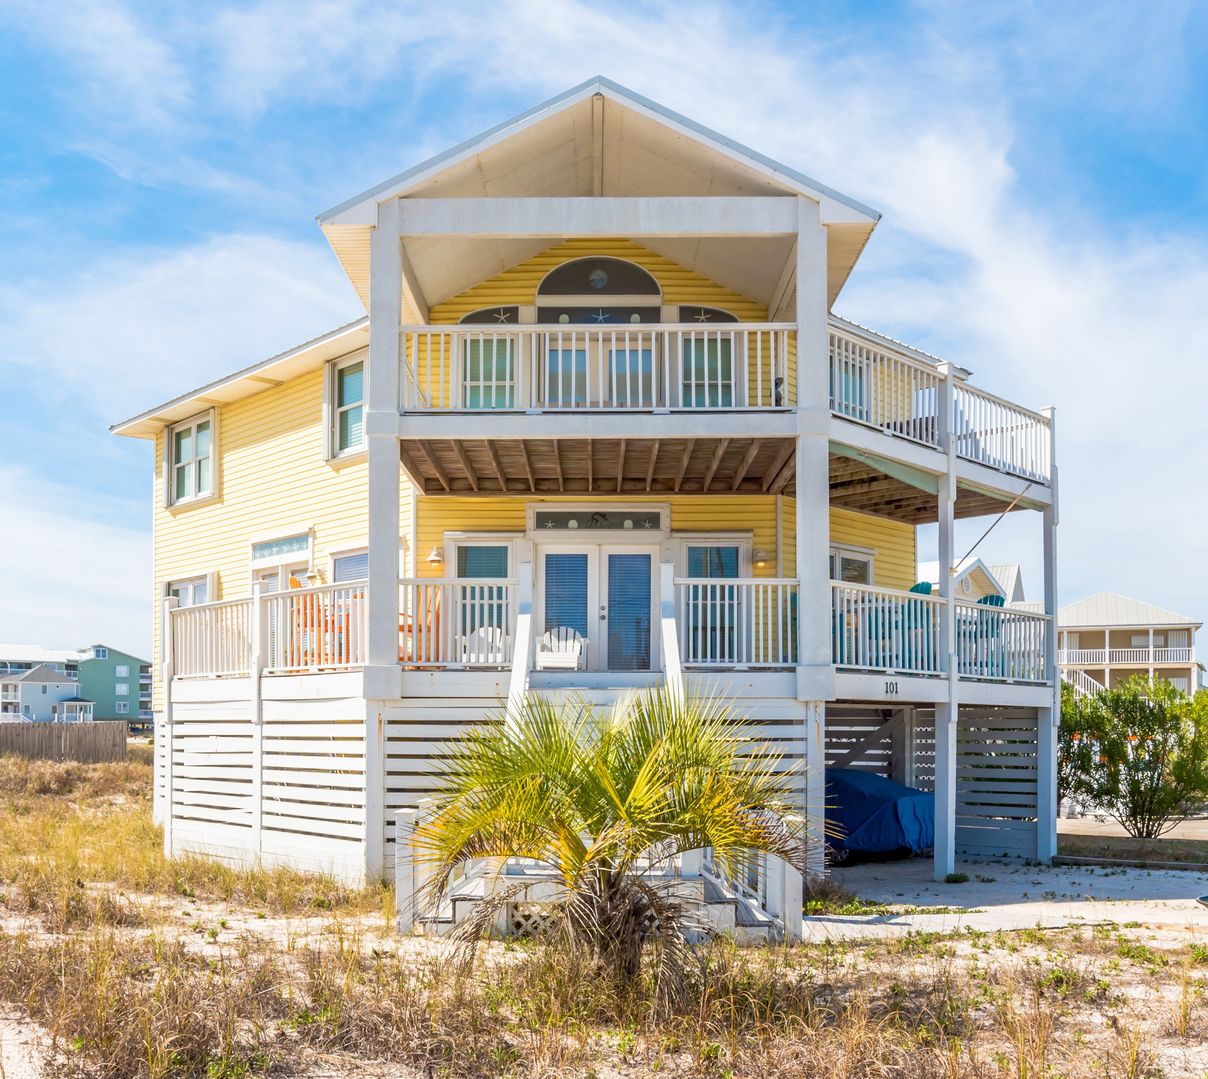 The exterior view of one of our Airbnb Gulf Shores AL rentals